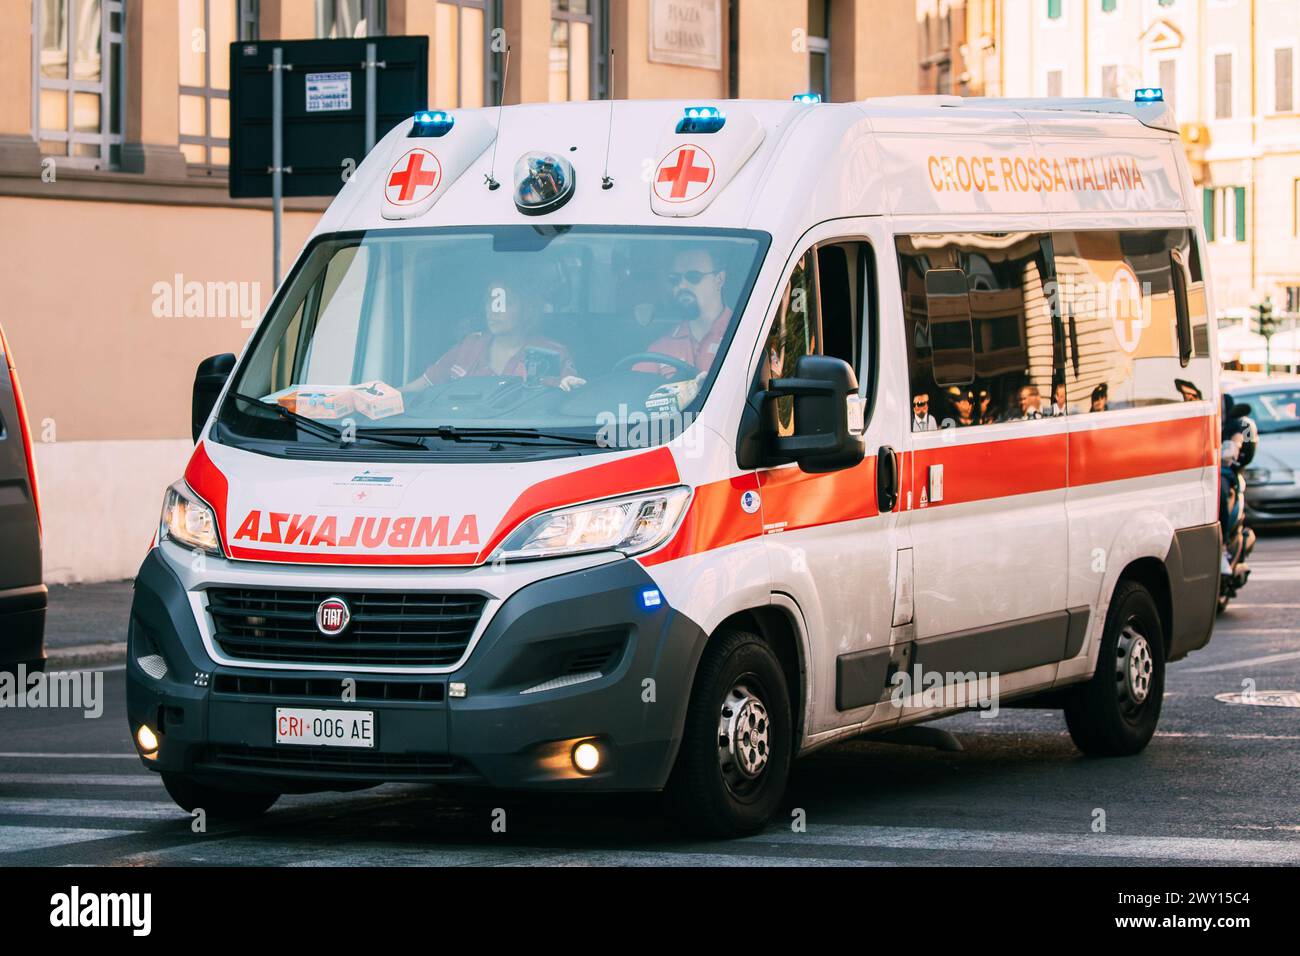 Rome, Italy. Moving With Siren Emergency Ambulance Reanimation Van Fiat Car On Street. Emergency Lights System Els Activated Stock Photo